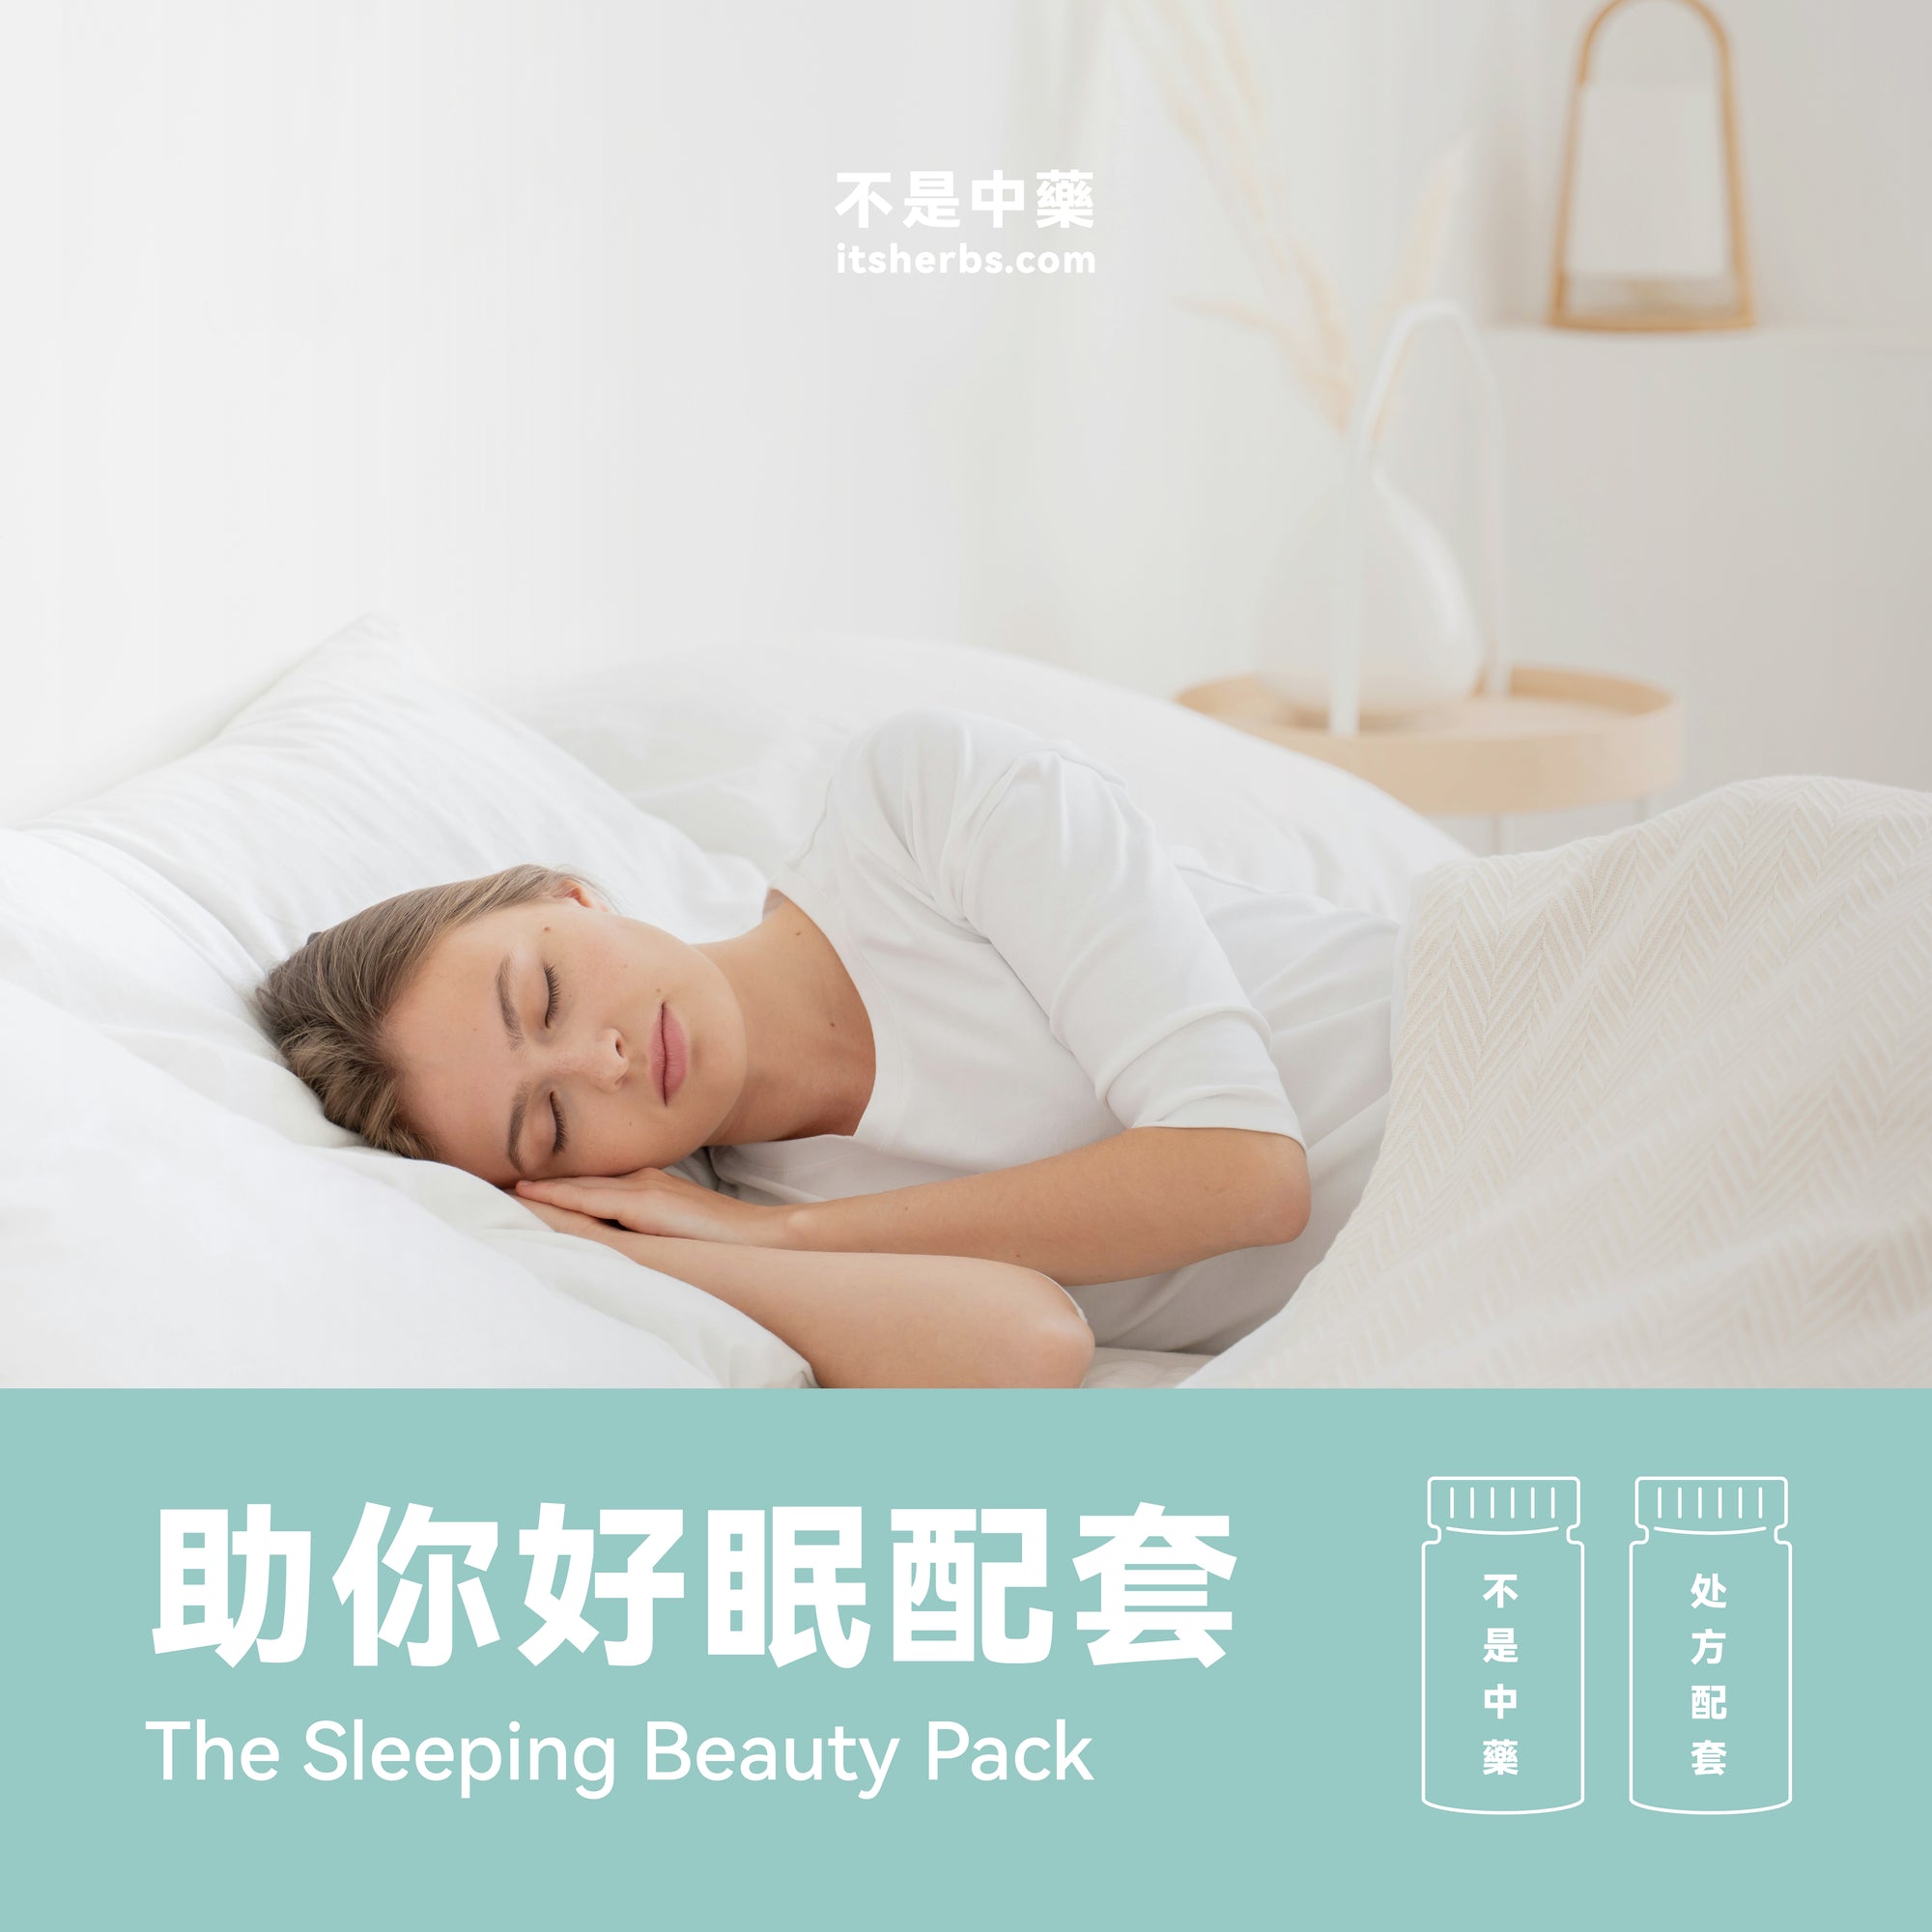 The Sleeping Beauty Pack